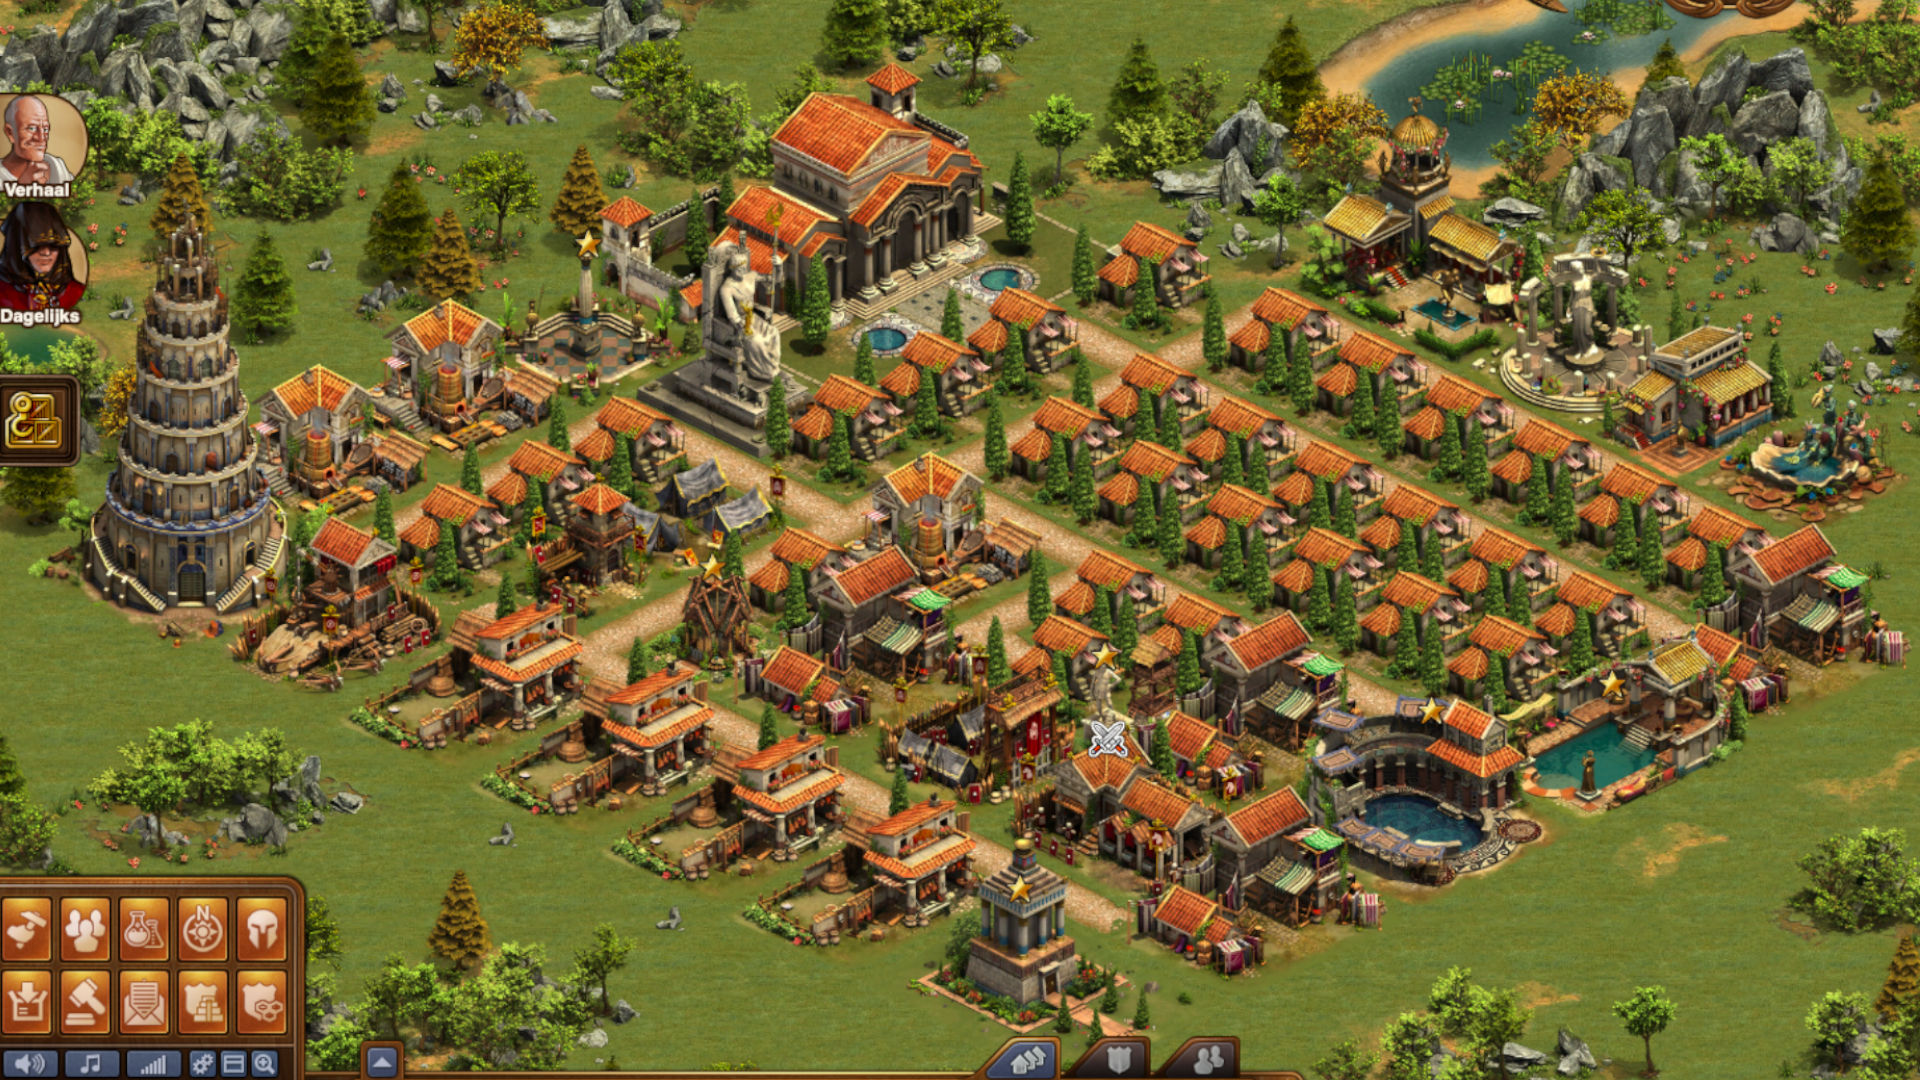 Forge of Empires: Build a City - Apps on Google Play